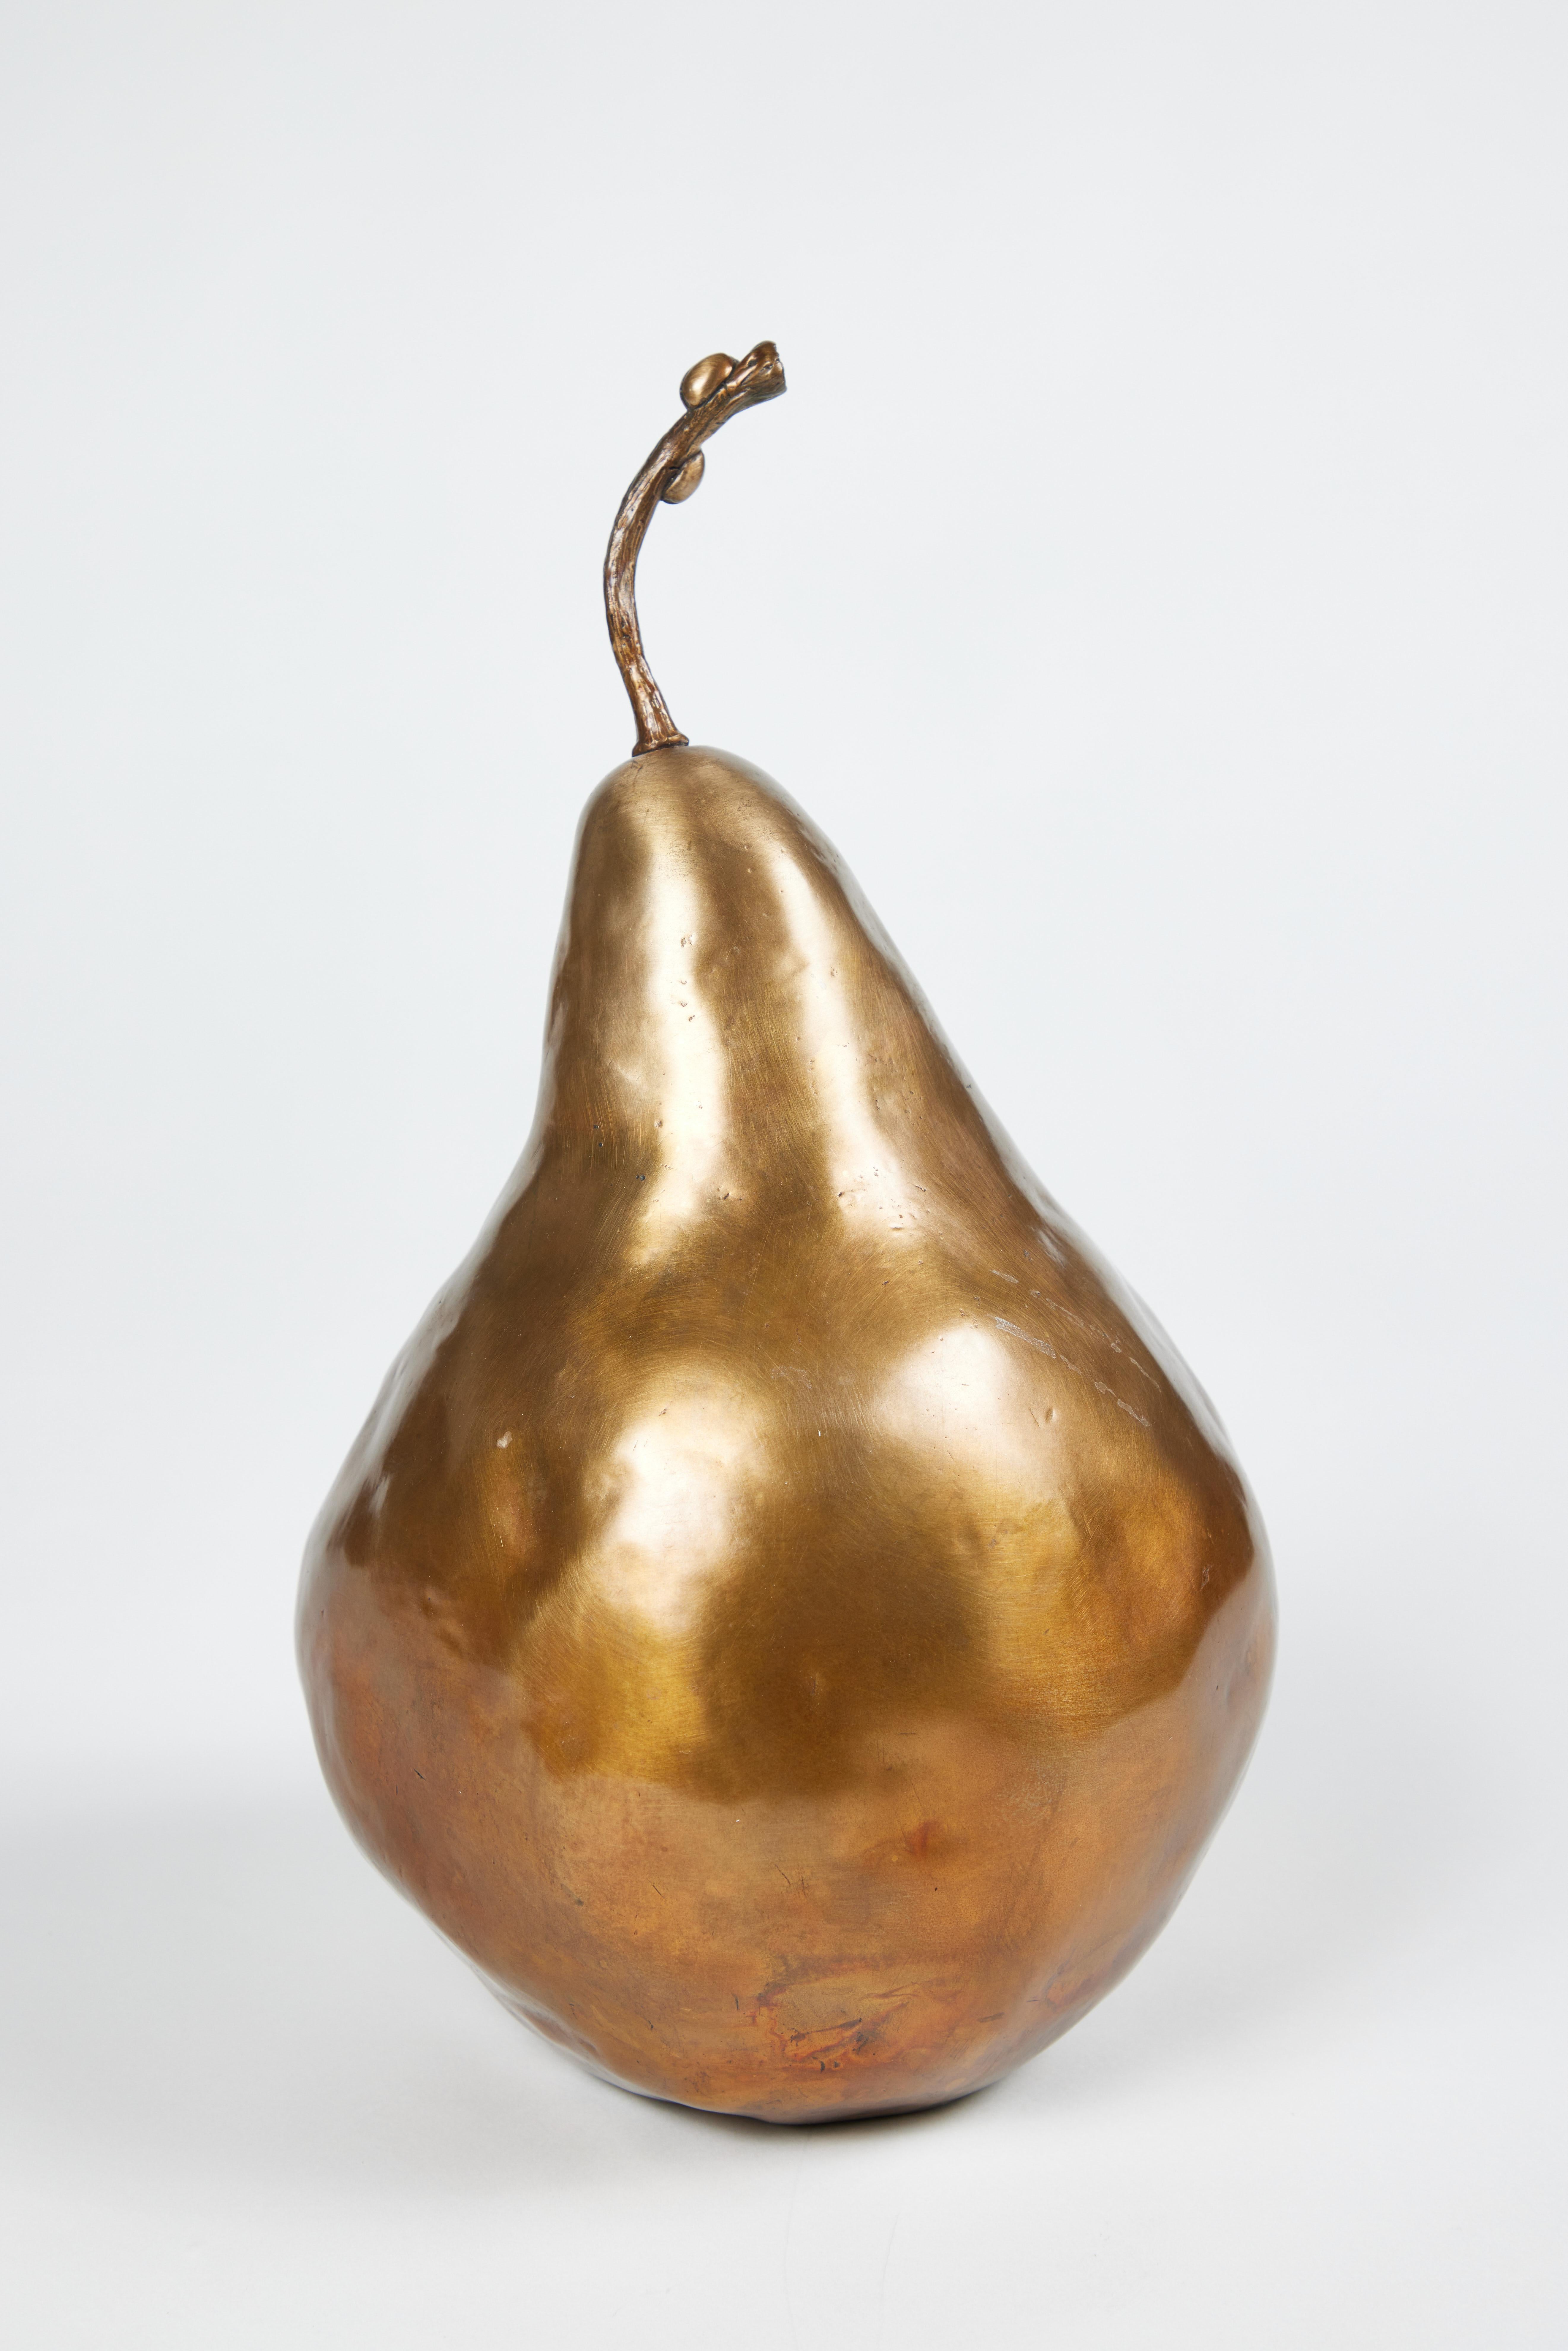 Bronze sculpture depicting a pear with two ladybugs on the stem. Signed and numbered 12/30 along the base.